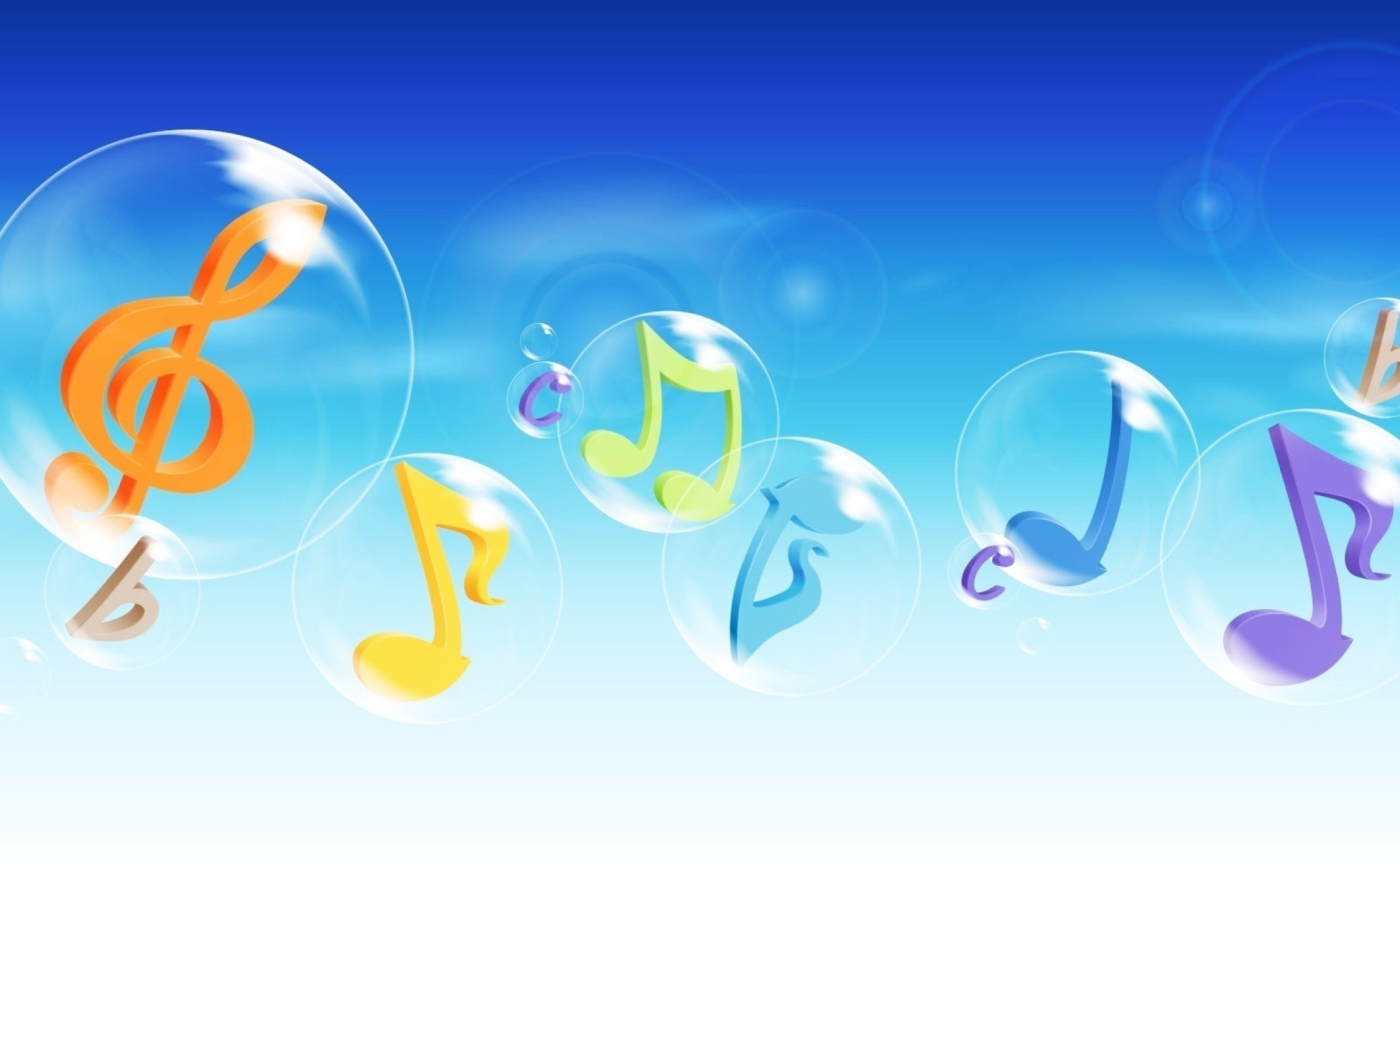 Musical Notes In Bubbles wallpaper 1400x1050